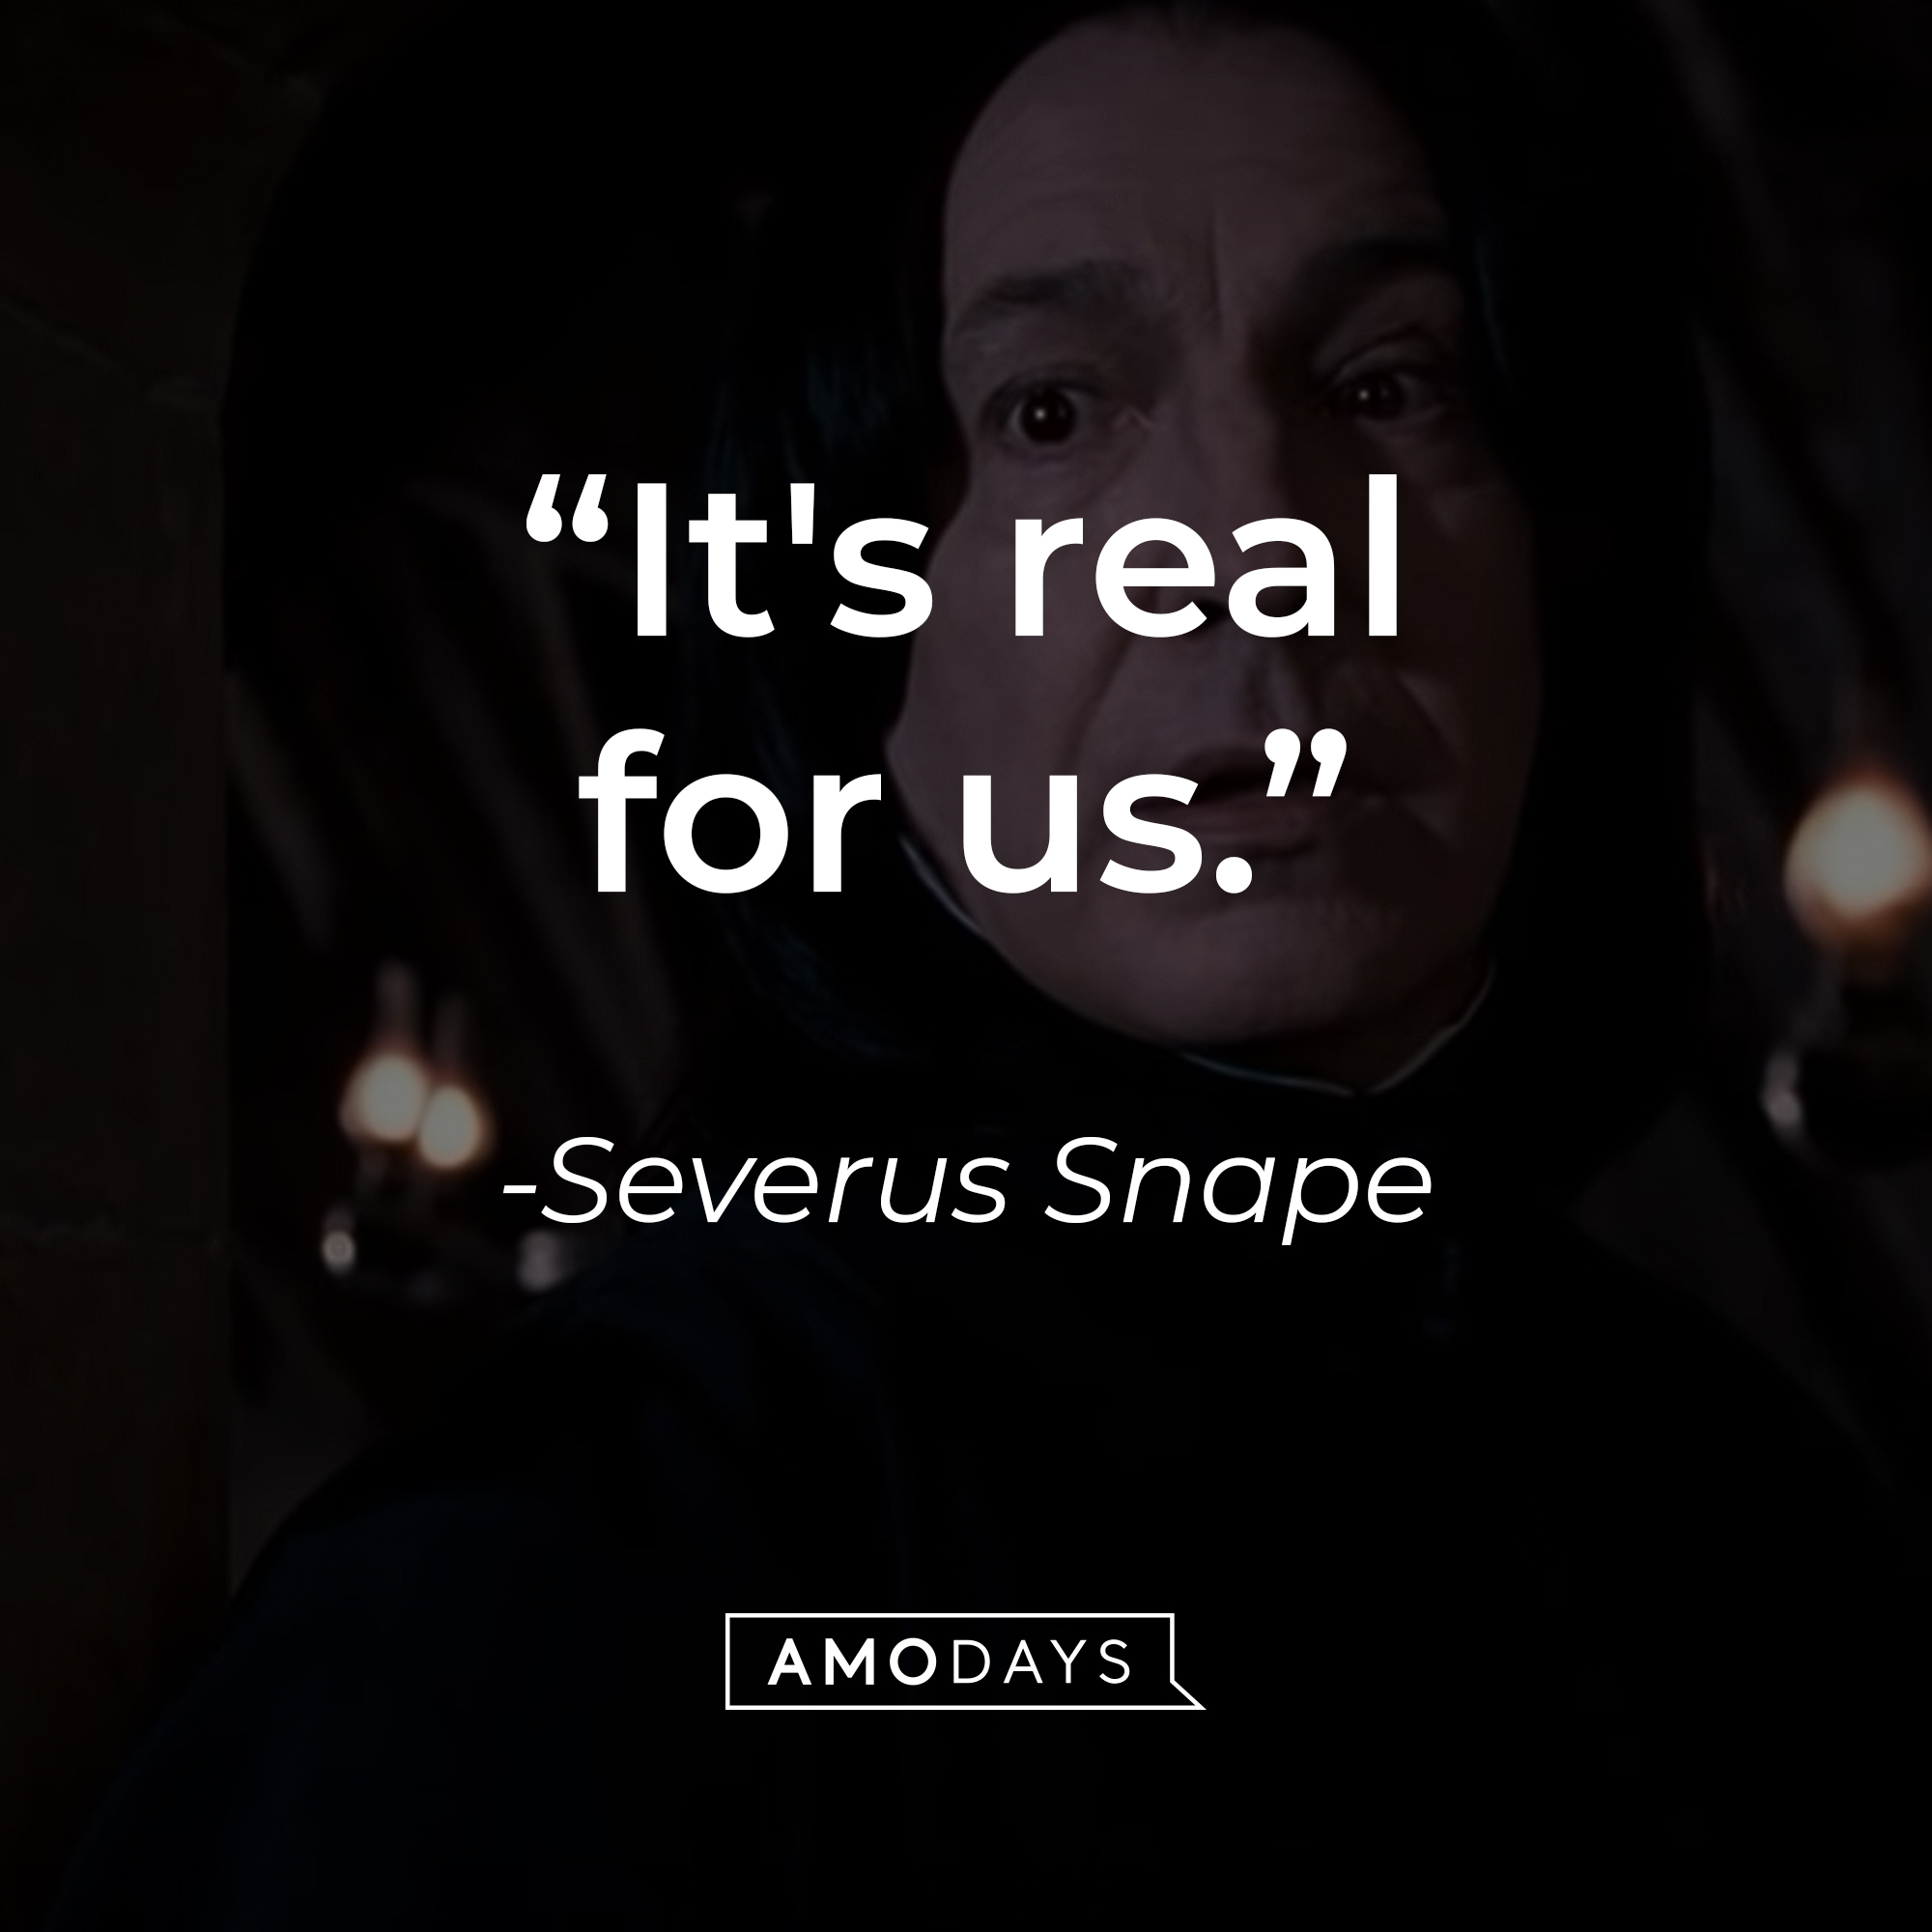 Severus Snape's quote: "It's real for us." | Source: YouTube/harrypotter